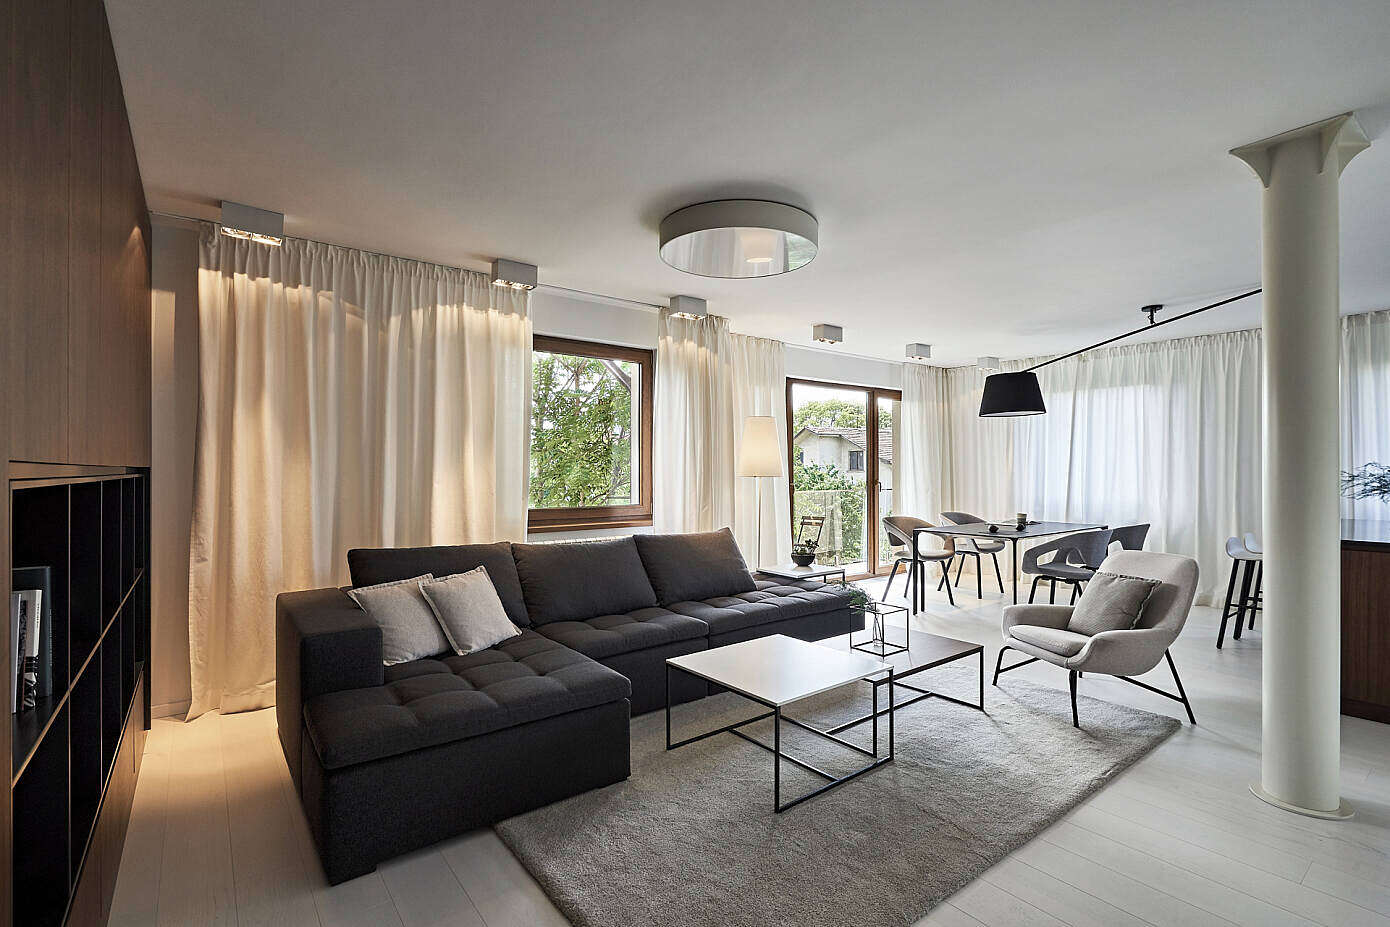 Airy and Spatious by Fimera Design Studio